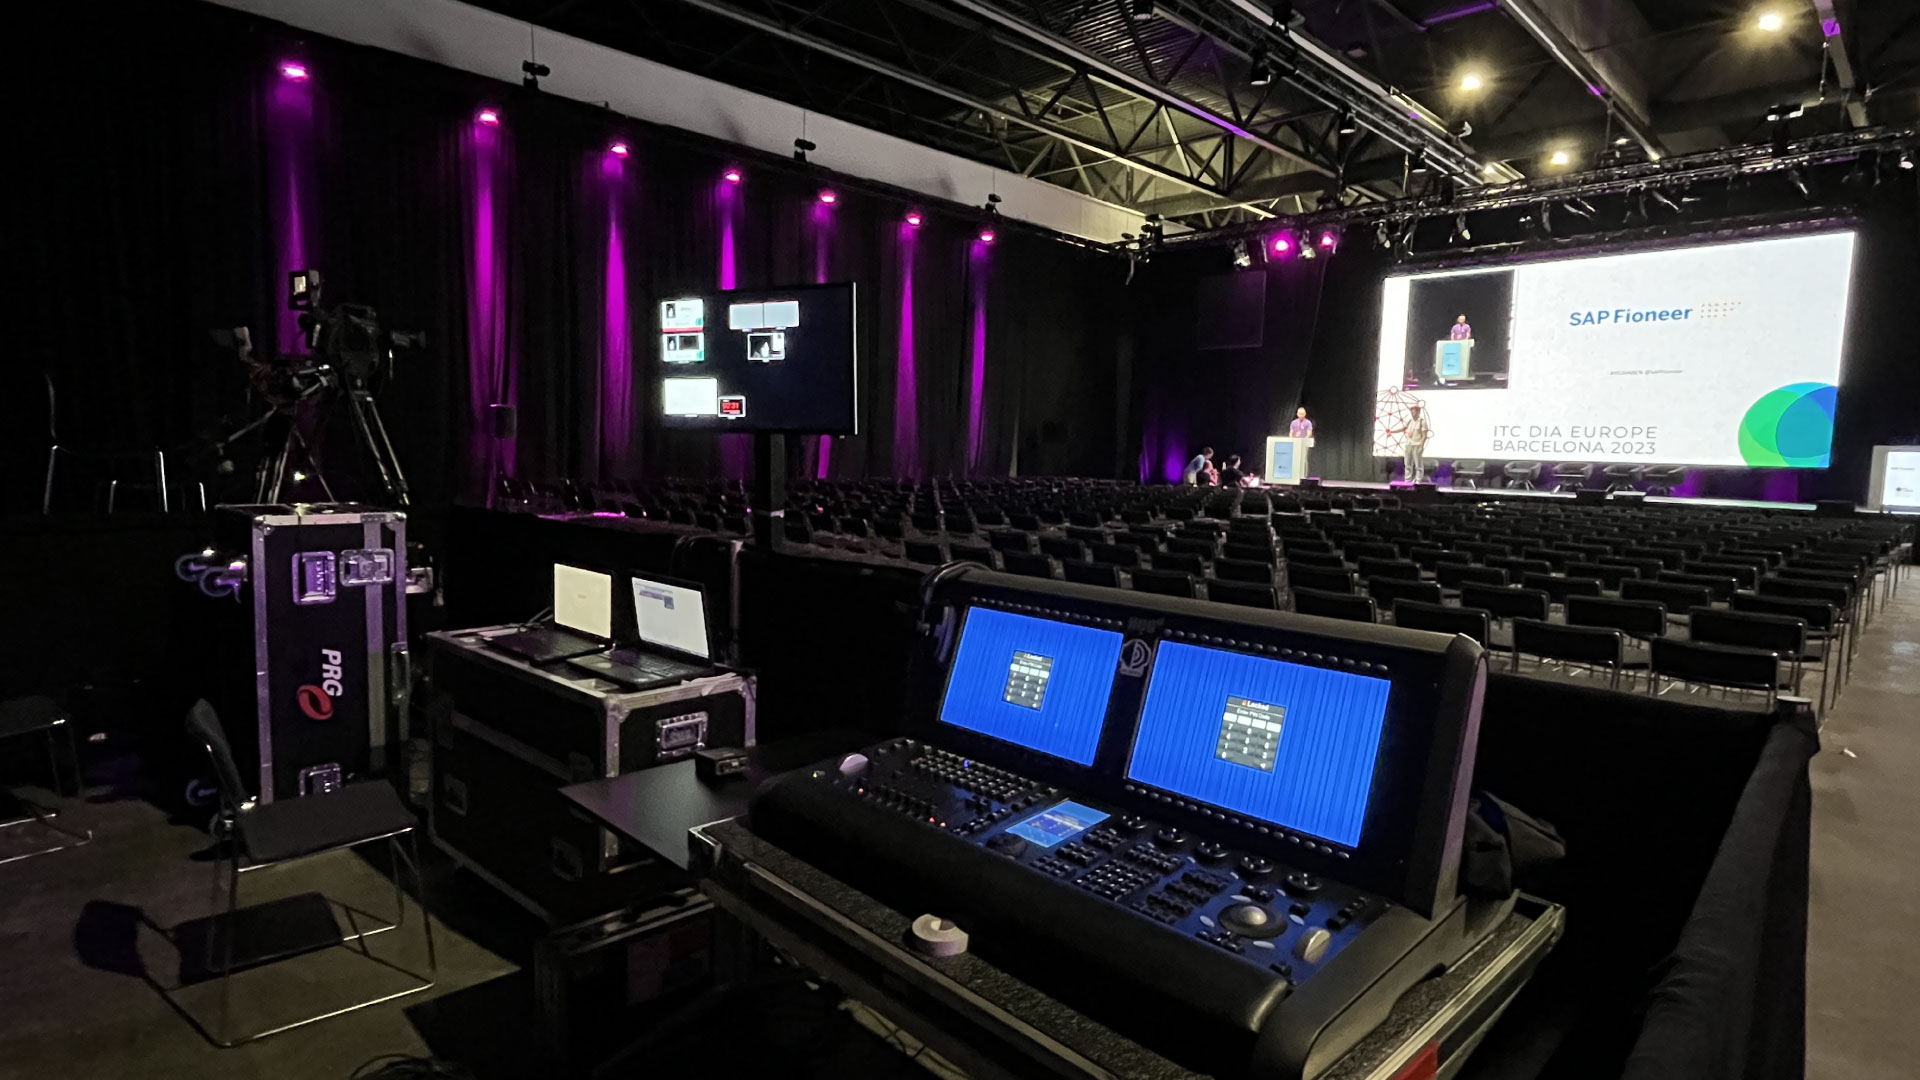 PRG Spain and PRG Netherlands worked together to provide a complete 360º service with lighting rigging, sound, video, broadcasting & stages for ITC DIA Europe